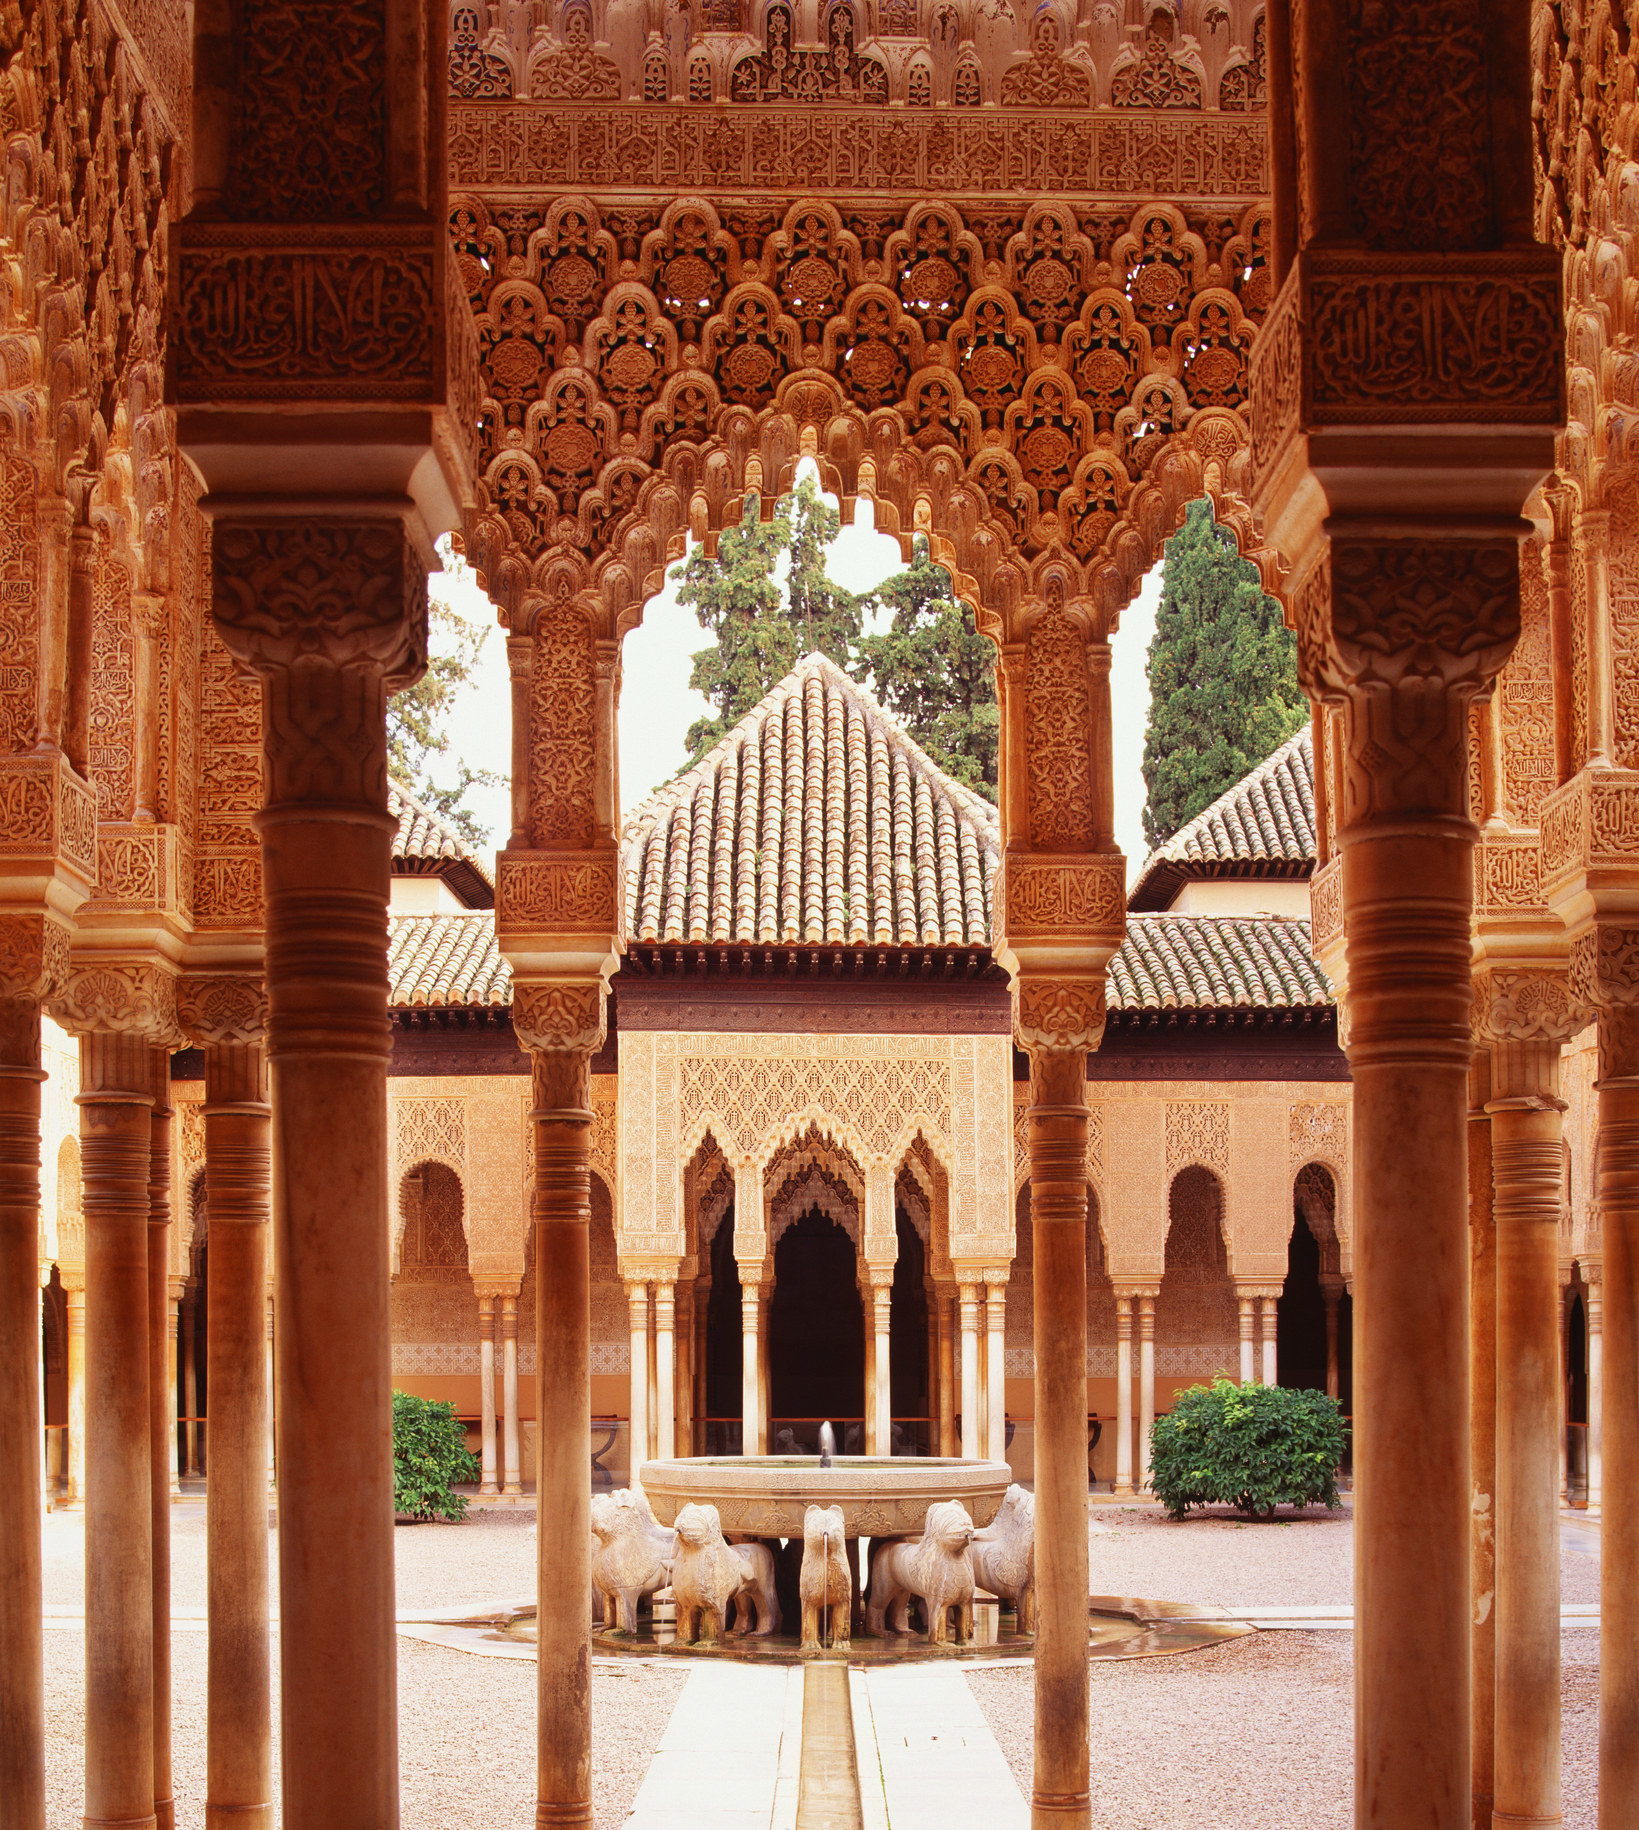 A courtyard framed with carvings in the Alhambra.